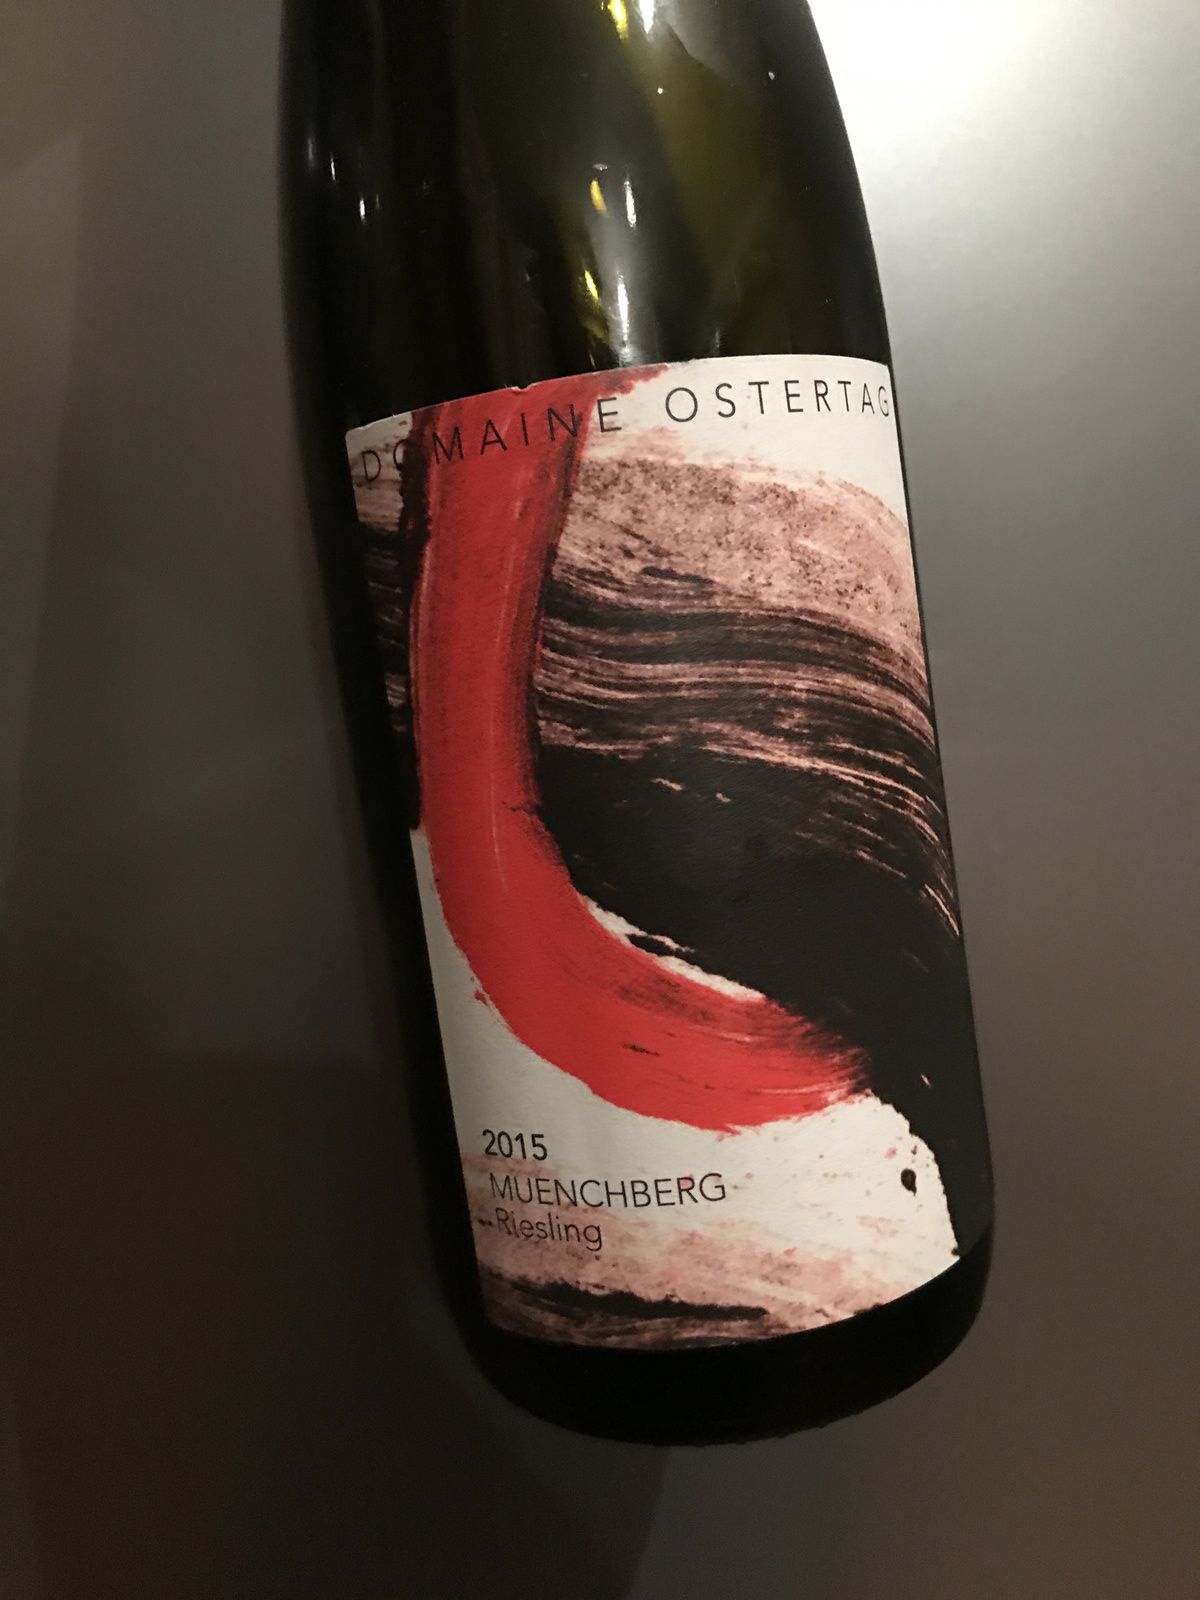 Alsace grand cru Muenchberg riesling 2015 Domaine Ostertag